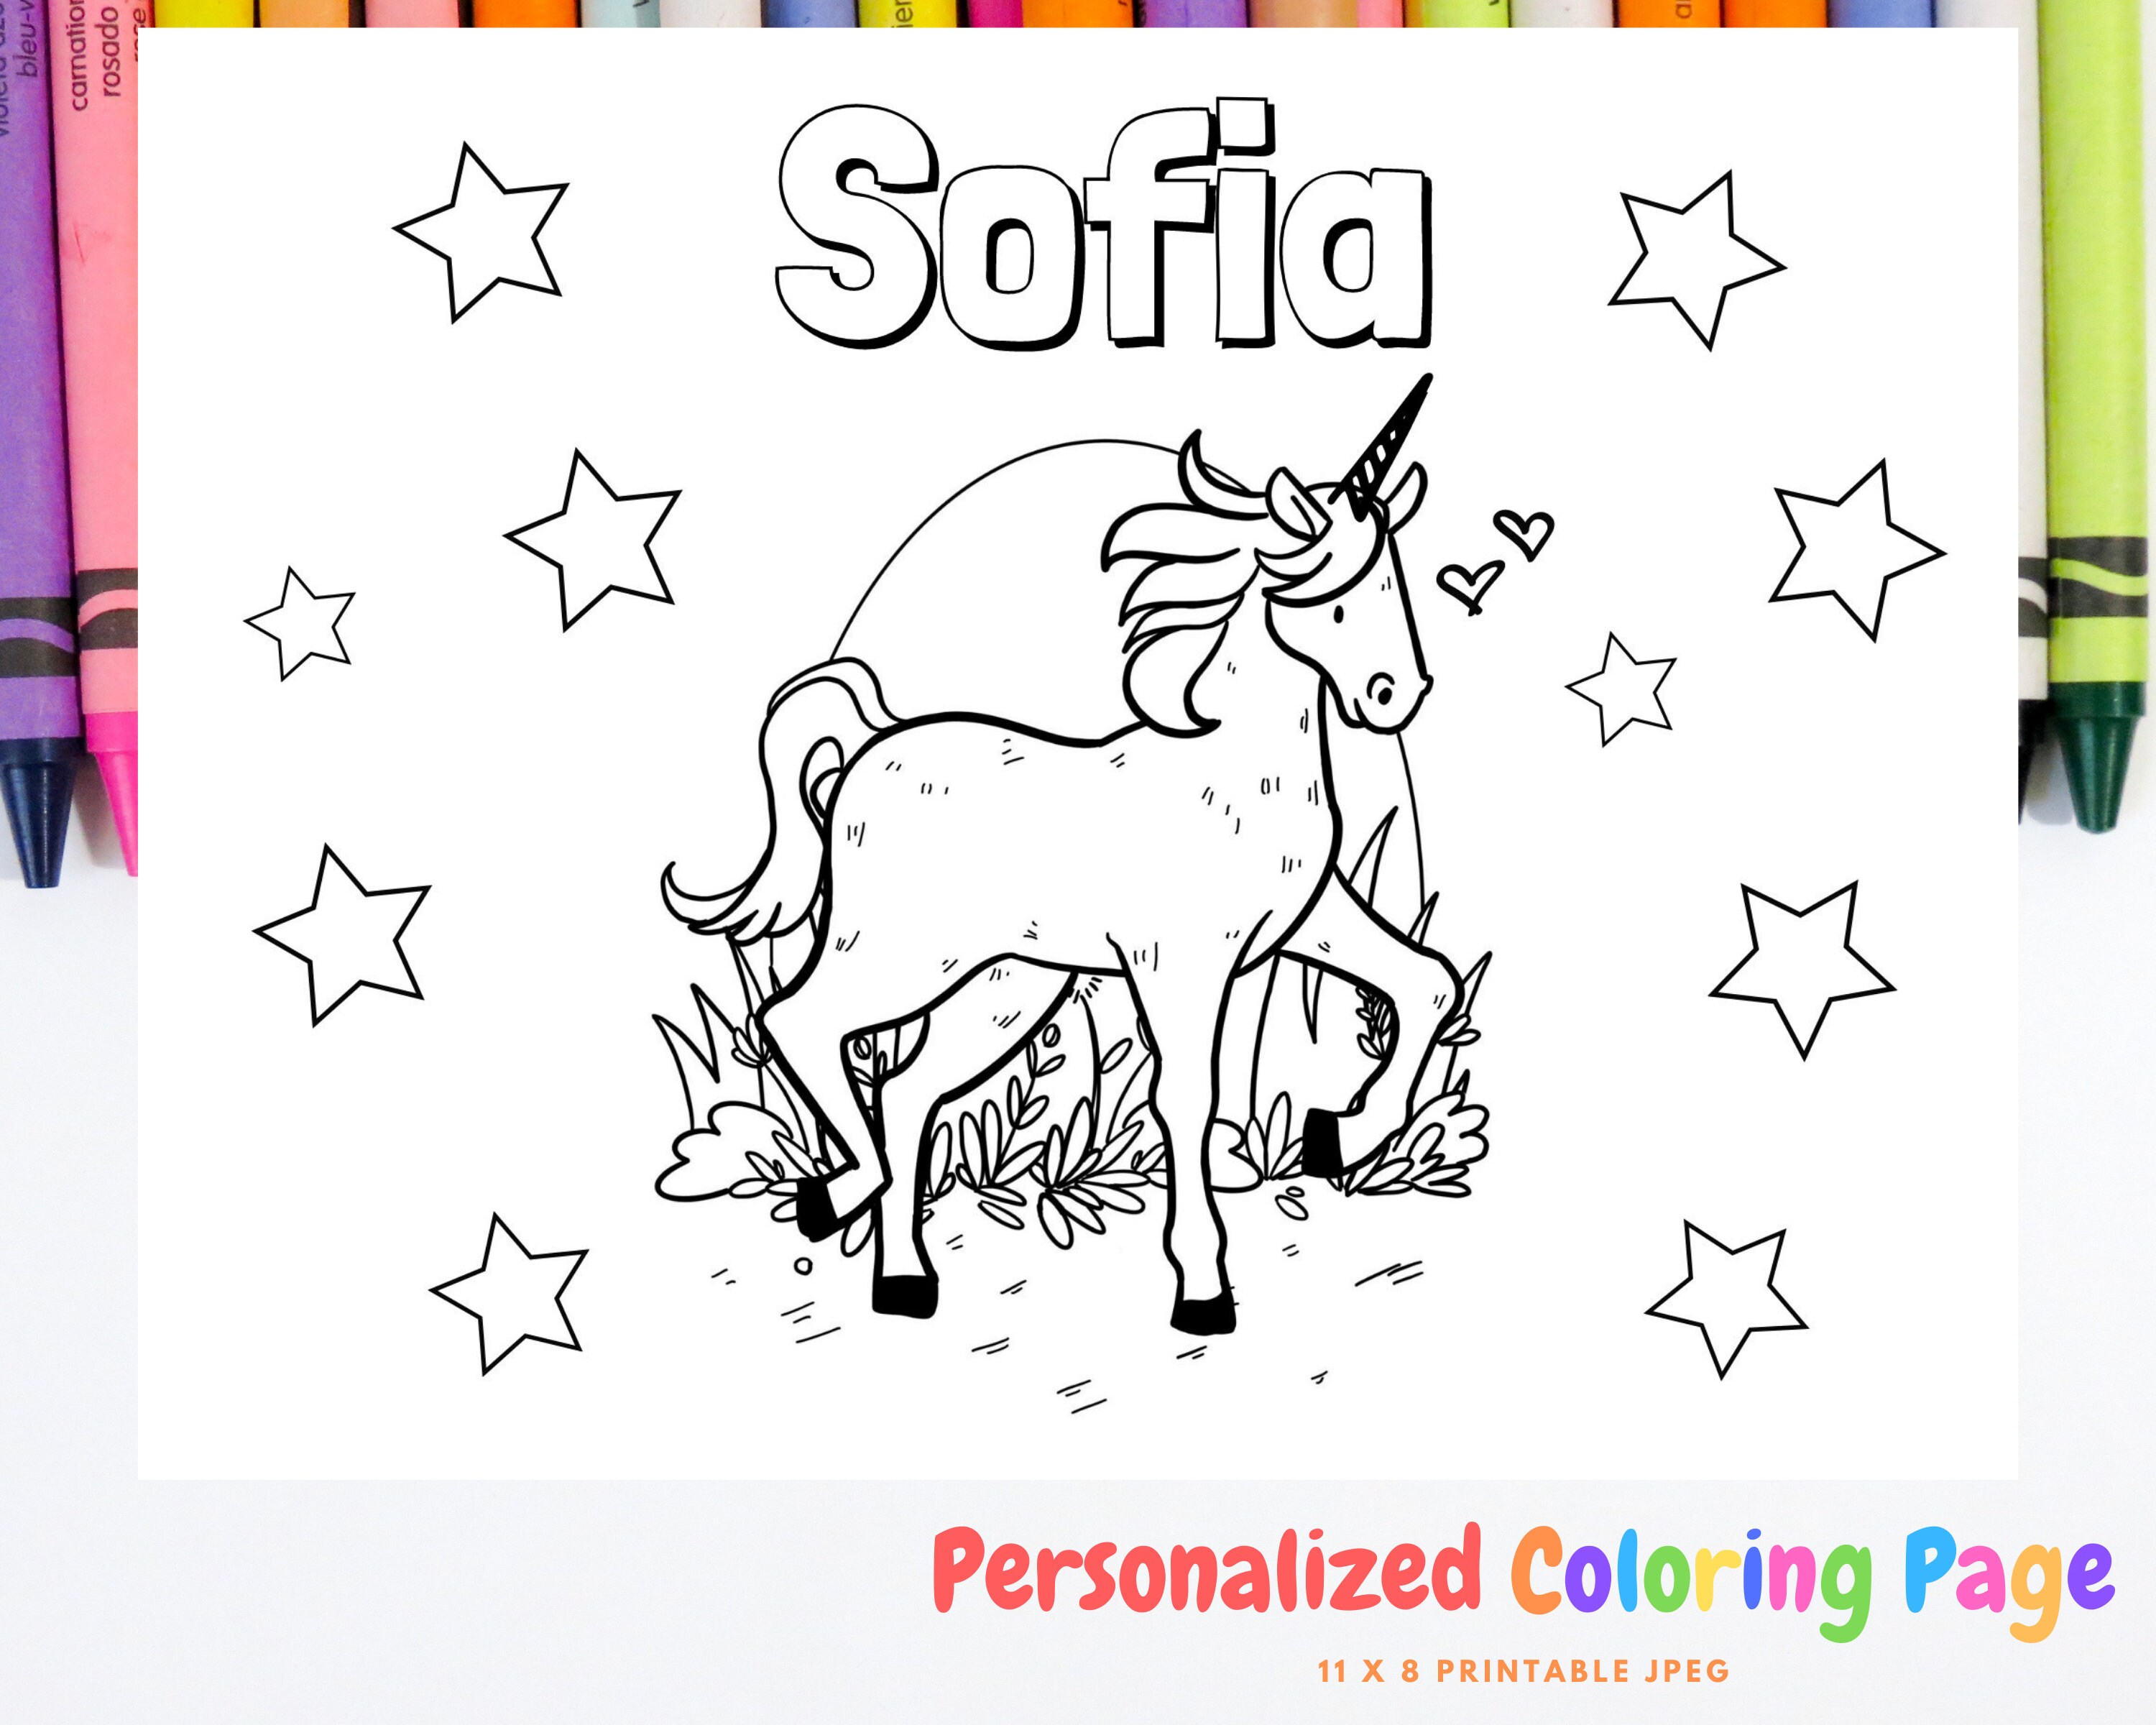 Personalized Coloring Book For Kids: Download At Home For Free!